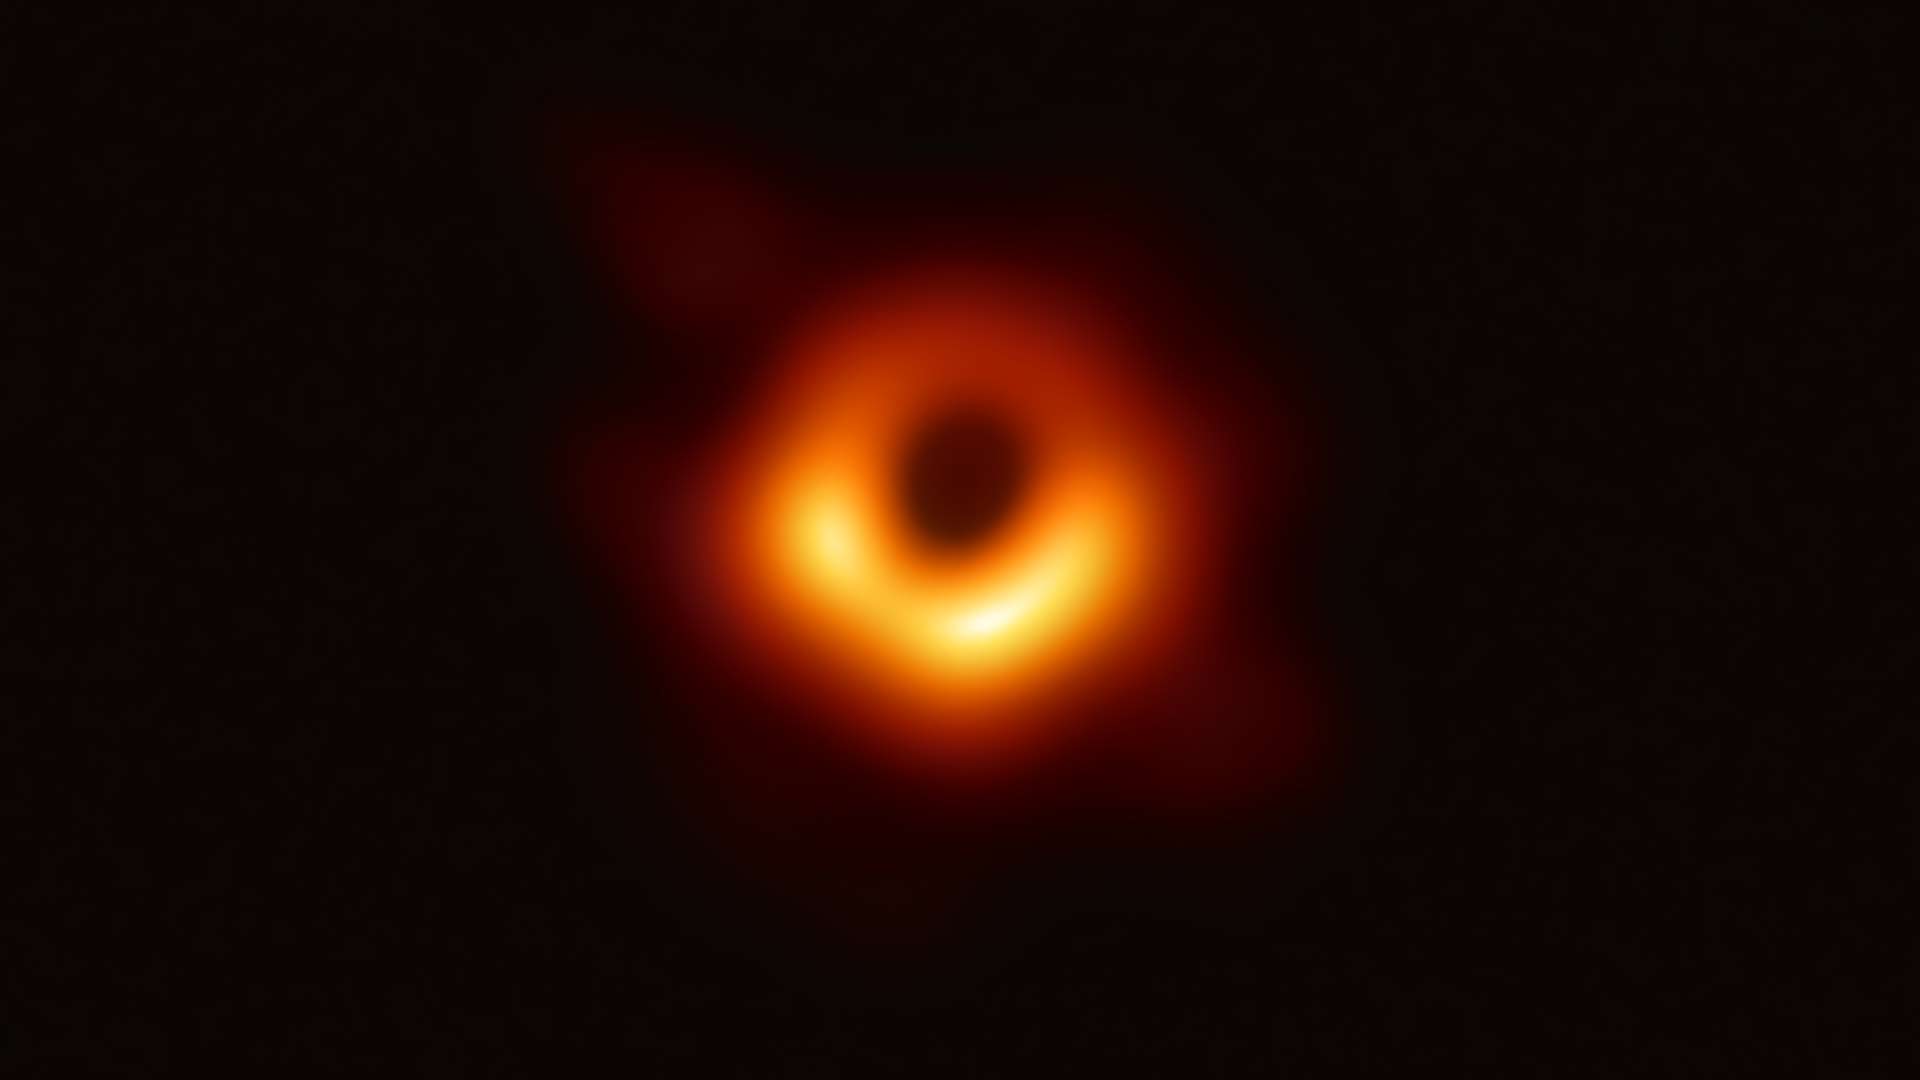 Hot gas swirls and outlines the black hole at the center of galaxy M87 under influence of gravity near its event horizon.
